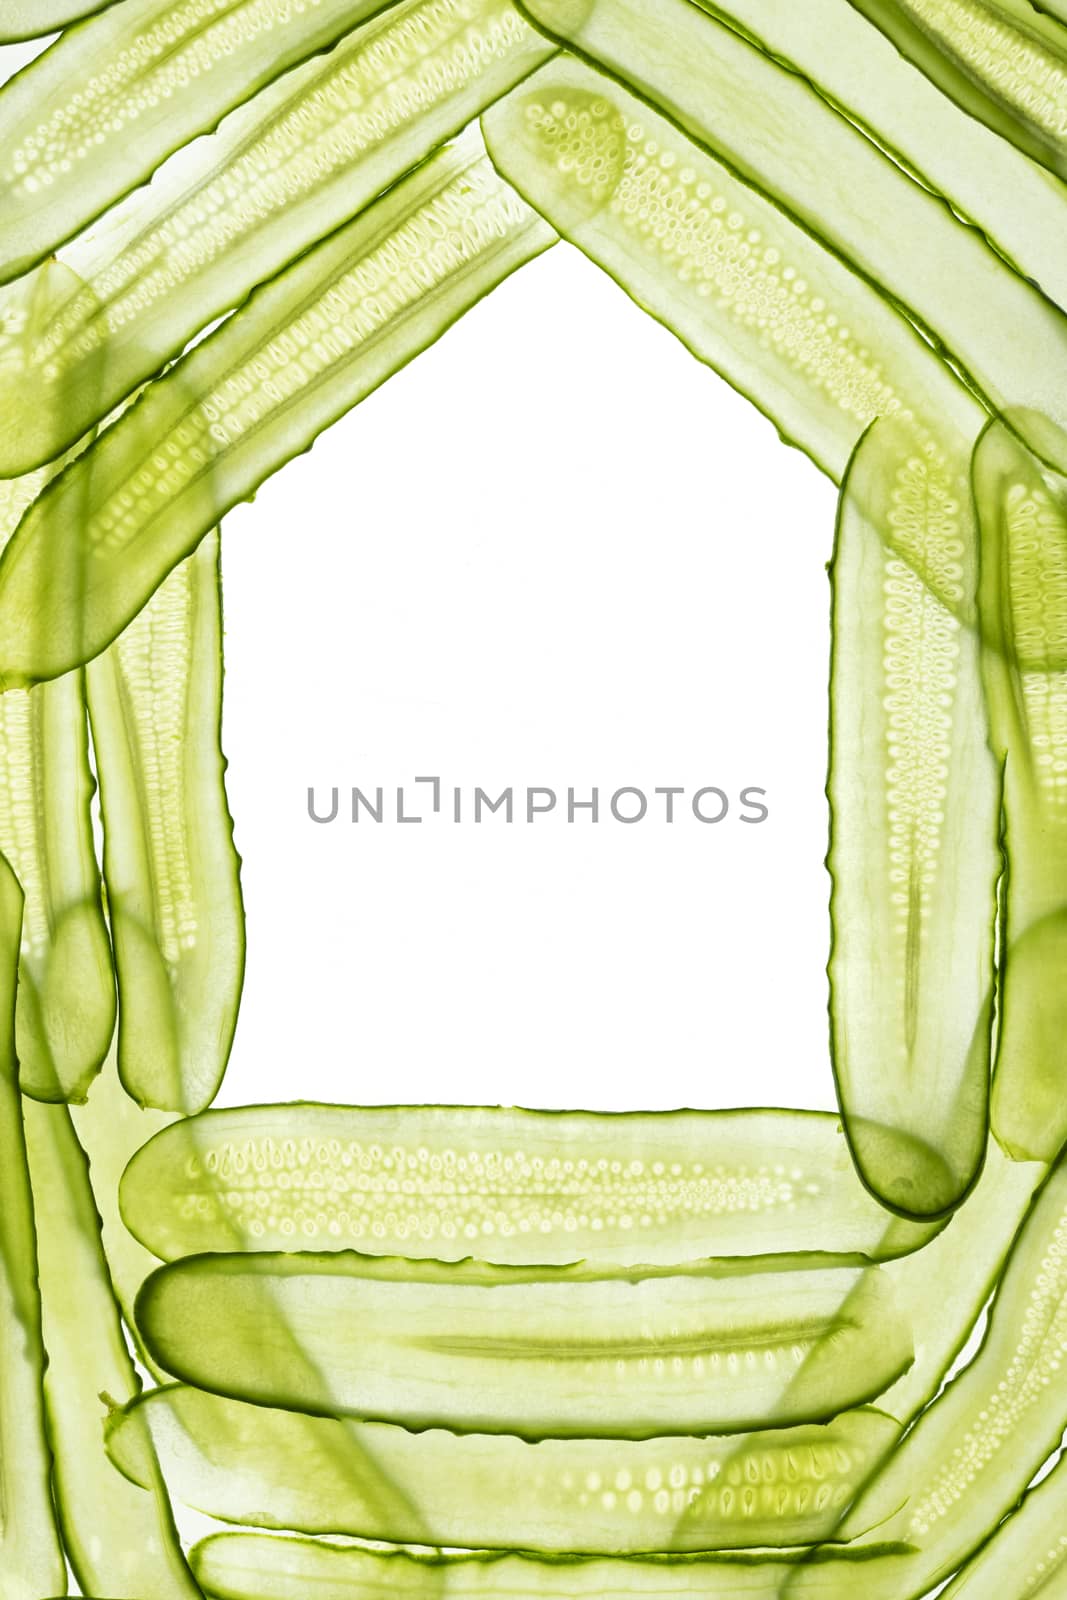 fresh sliced cucumber isolated on white background. Top view by sashokddt